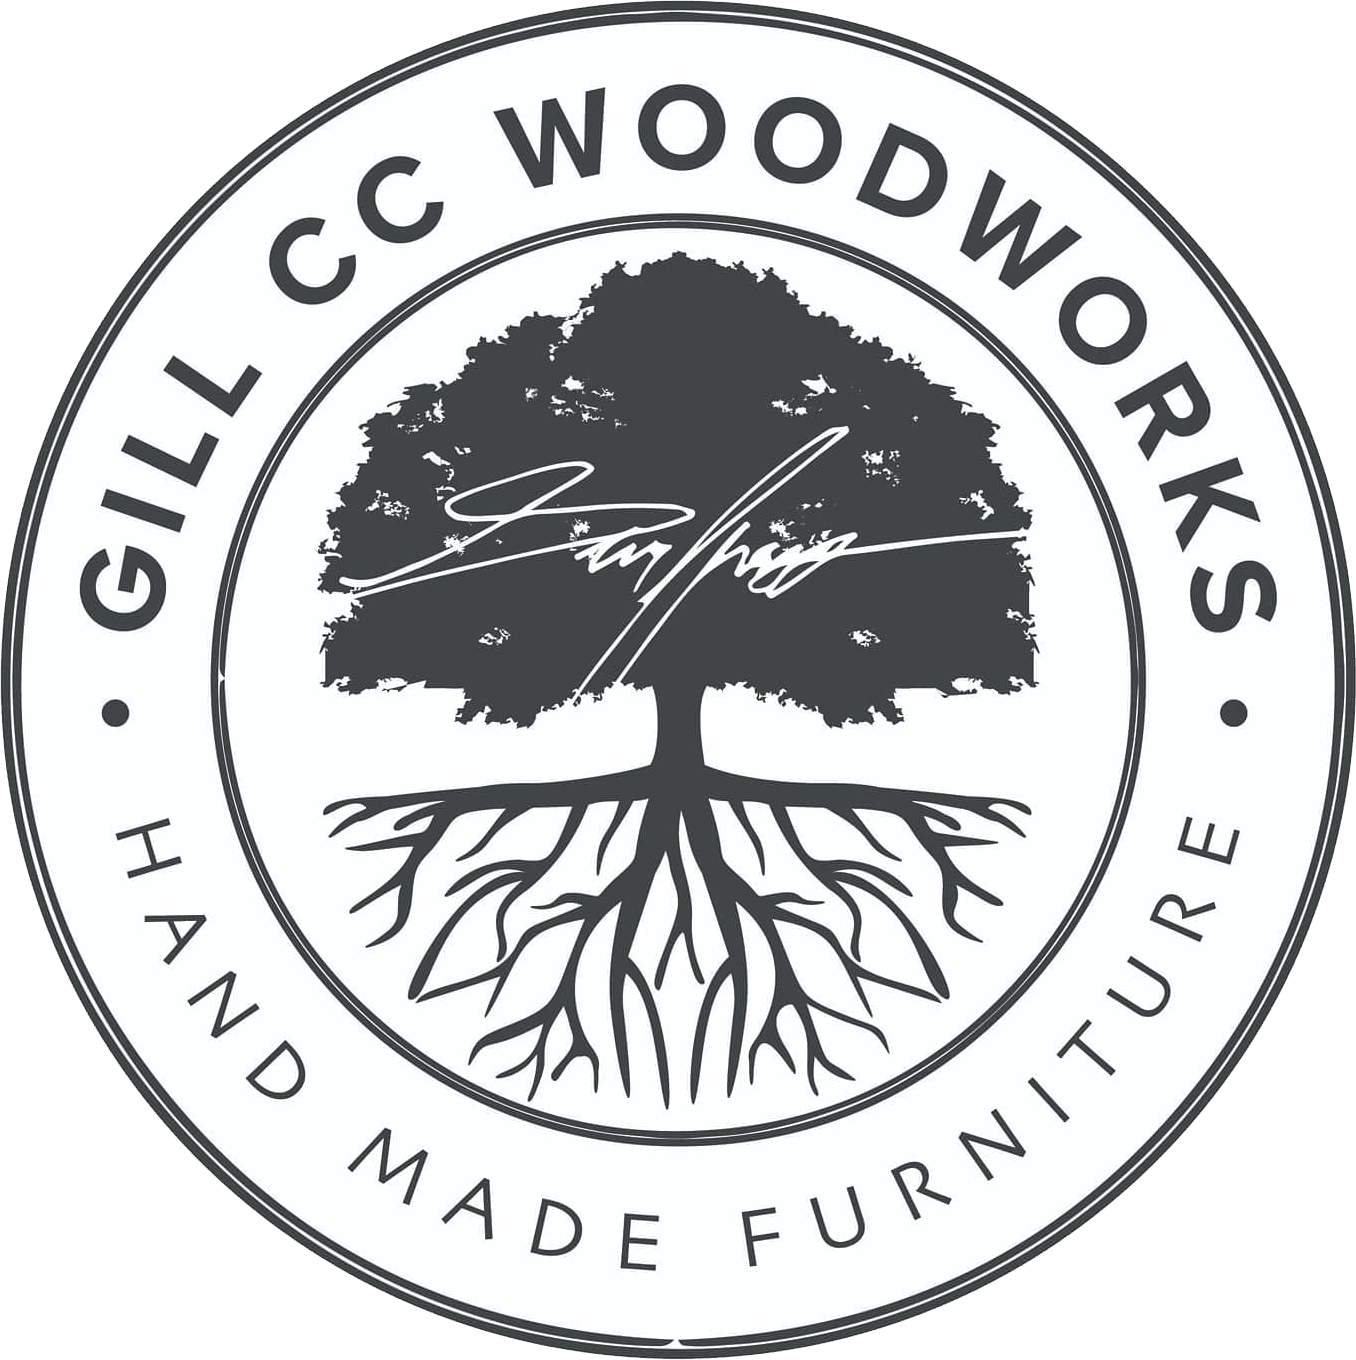 Gill CC Woodworks, custom, hand made furniture construction